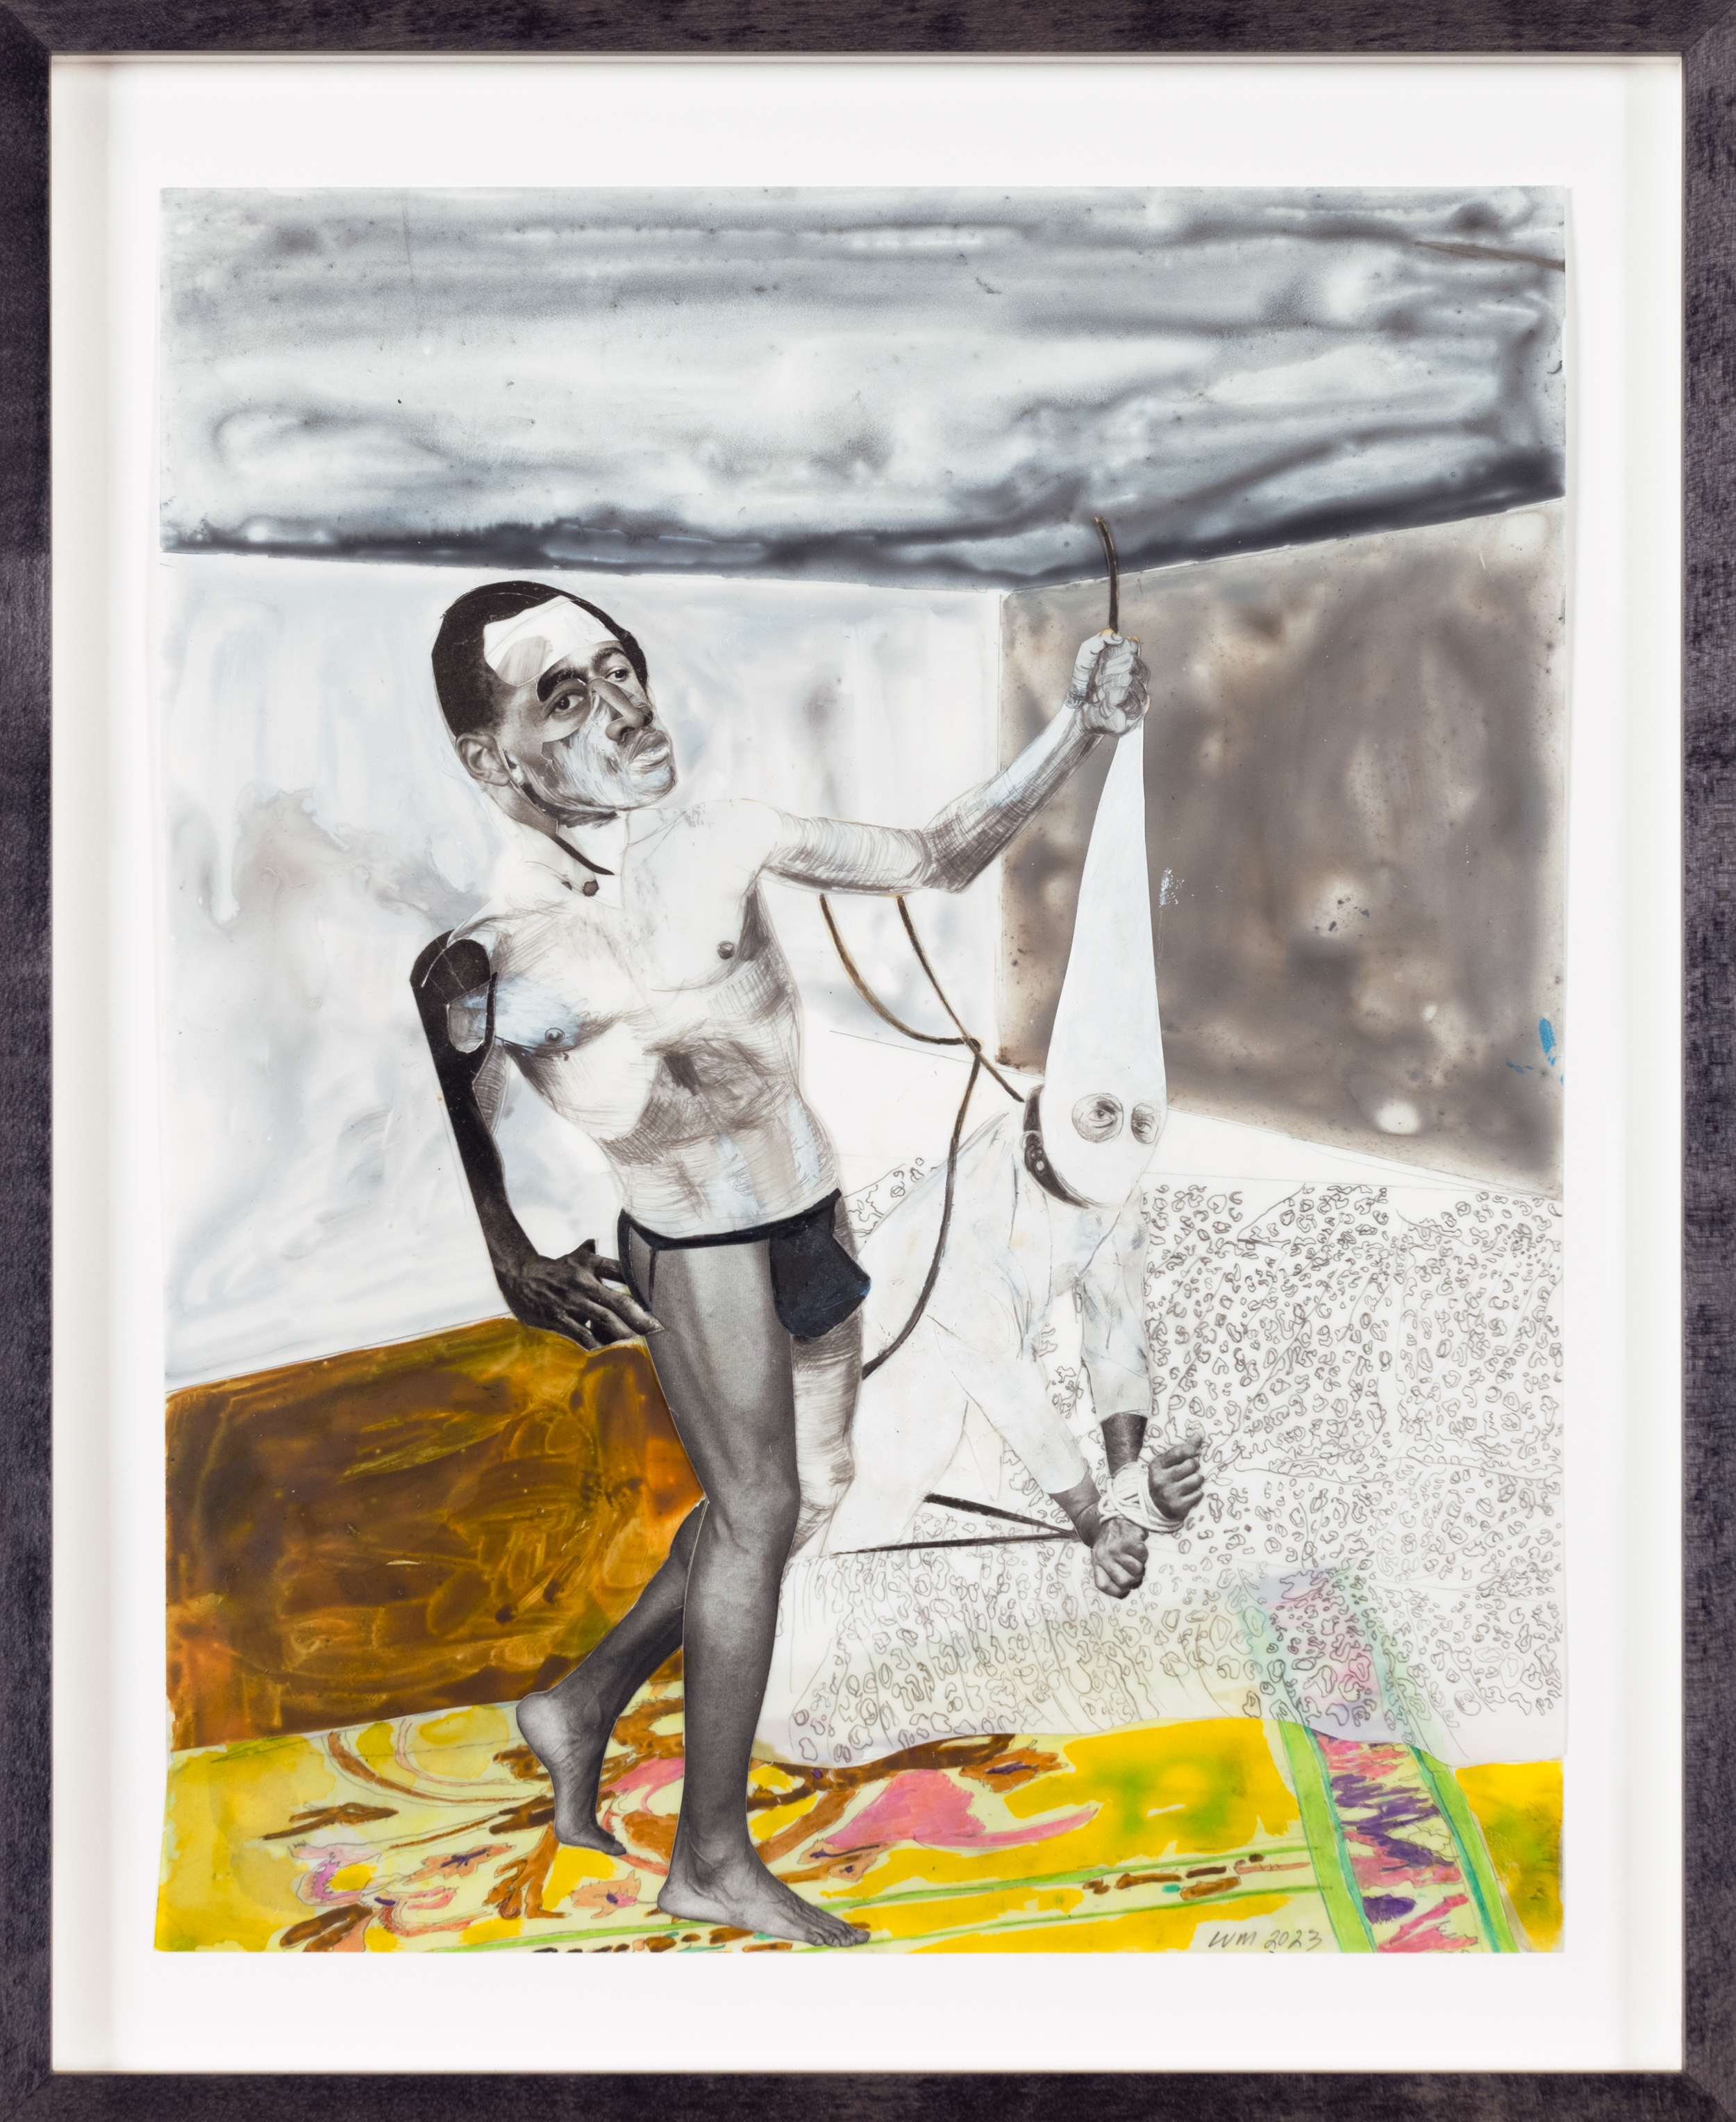 Color image of a mixed media collage depicting a figure in a jockstrap holding another figure in white hood in bondage